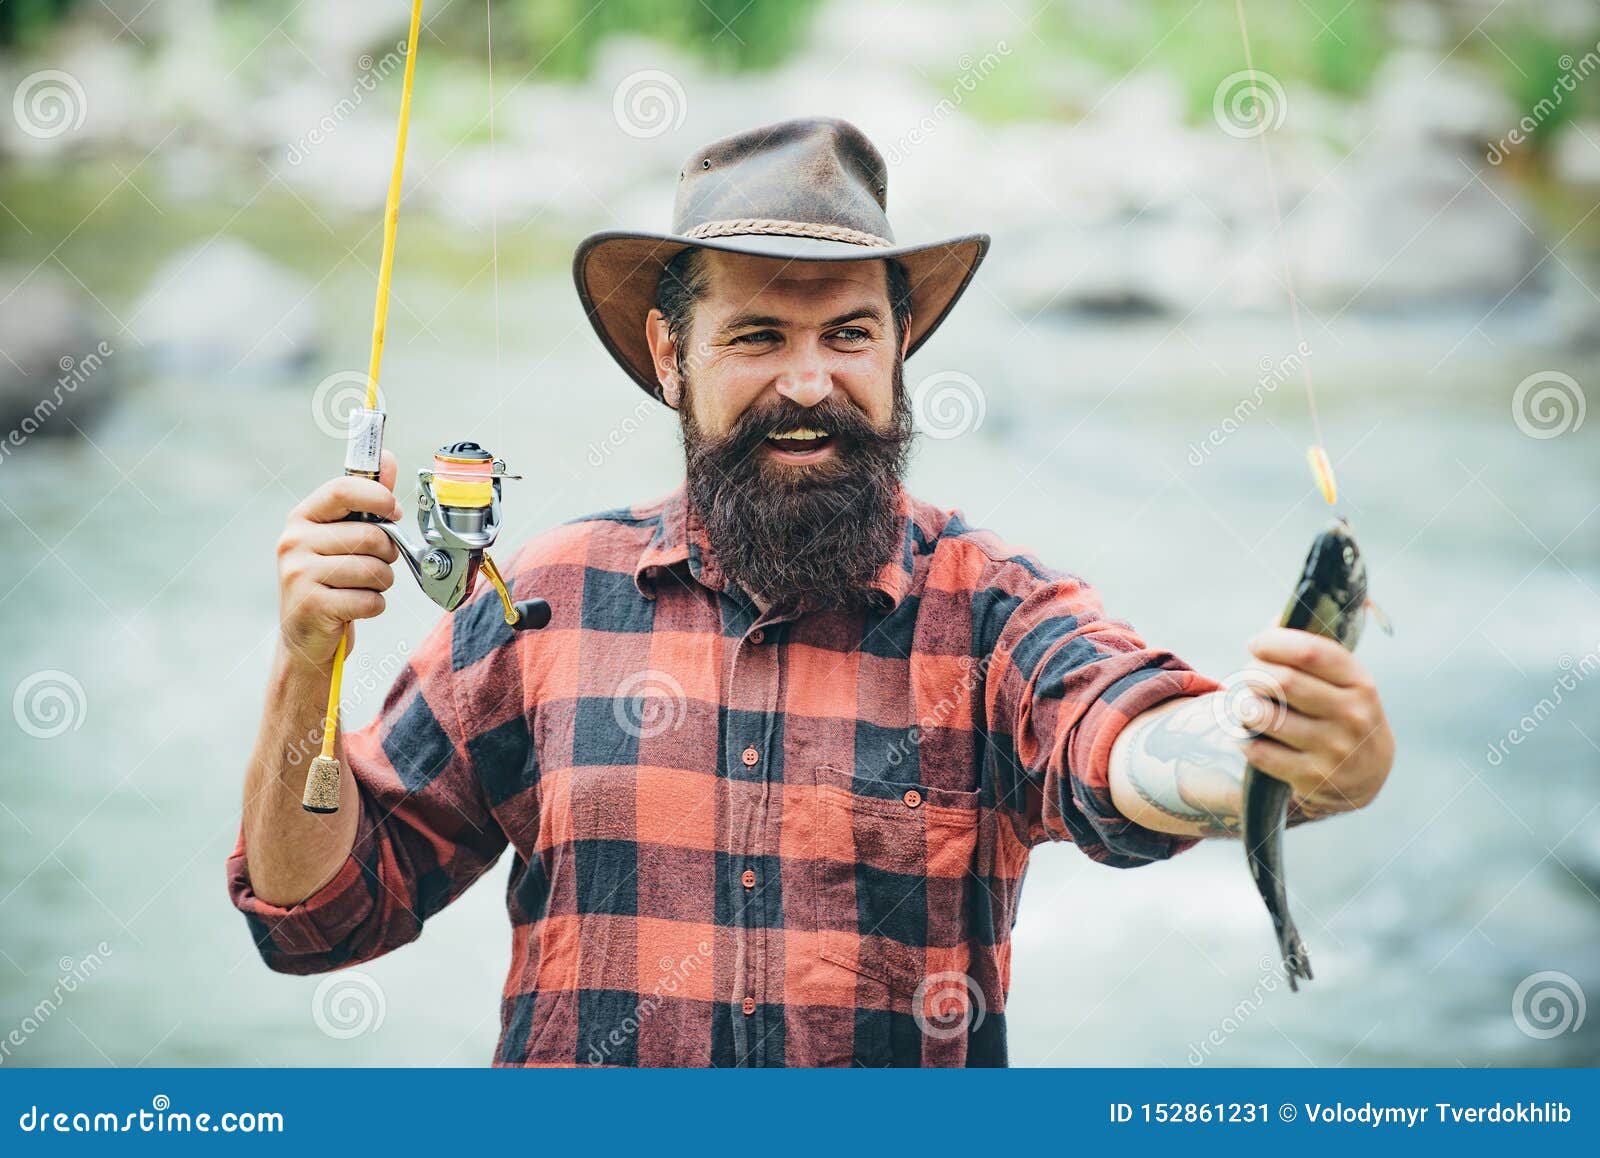 Catching a Big Fish with a Fishing Pole. Fish on the Hook. Fly Fishing.  Holding Brown Trout Stock Image - Image of equipment, beard: 152861231